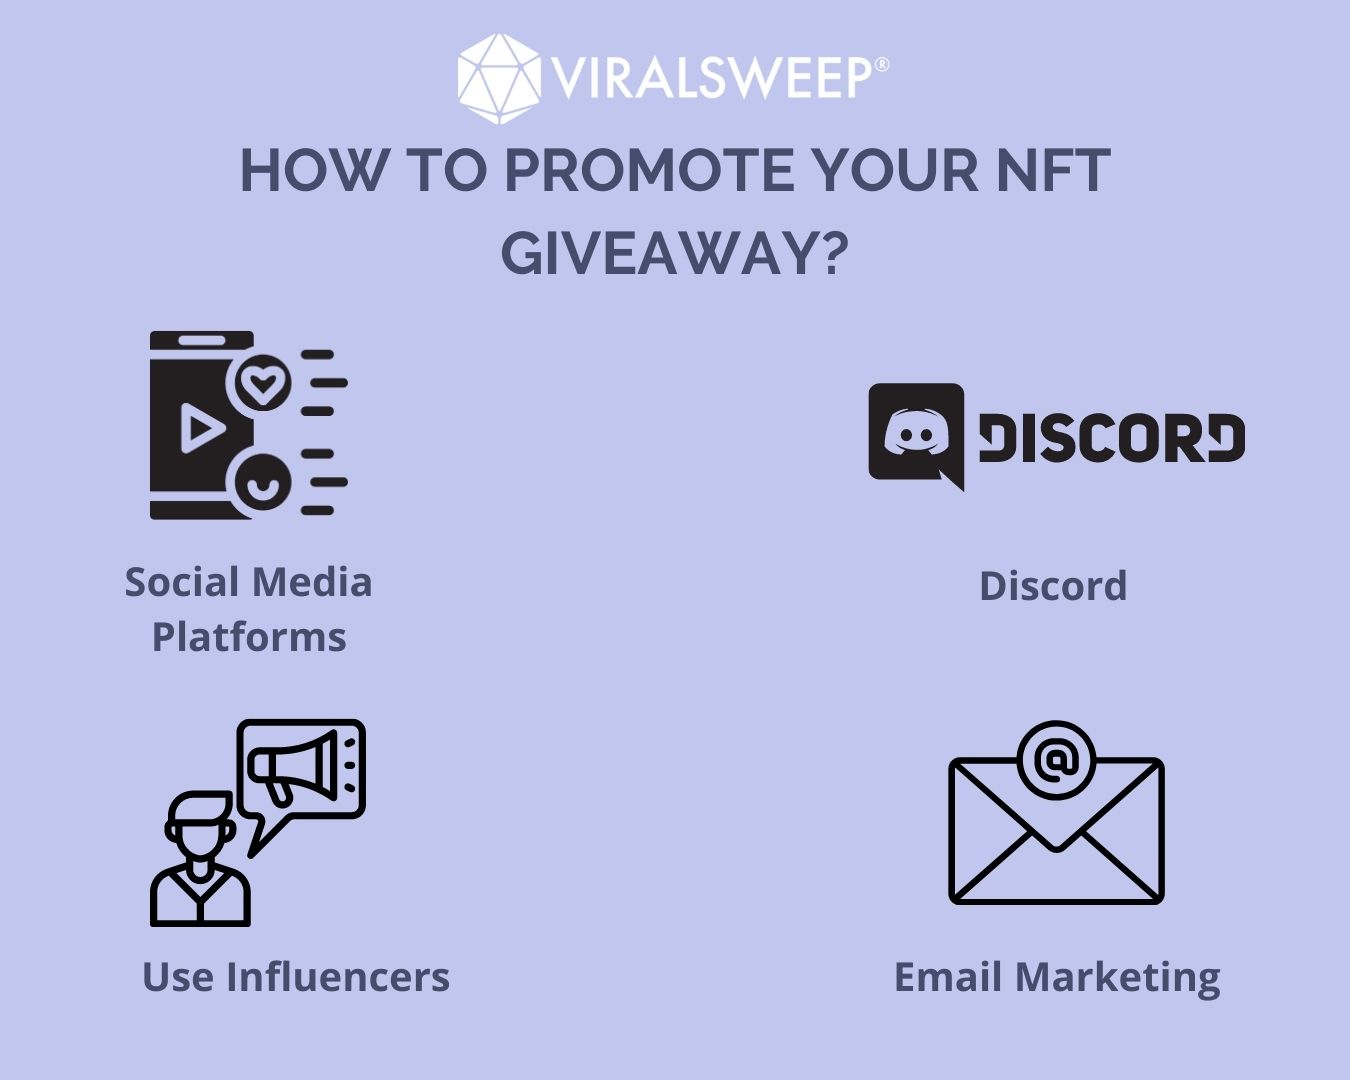 How to promote your NFT giveaway